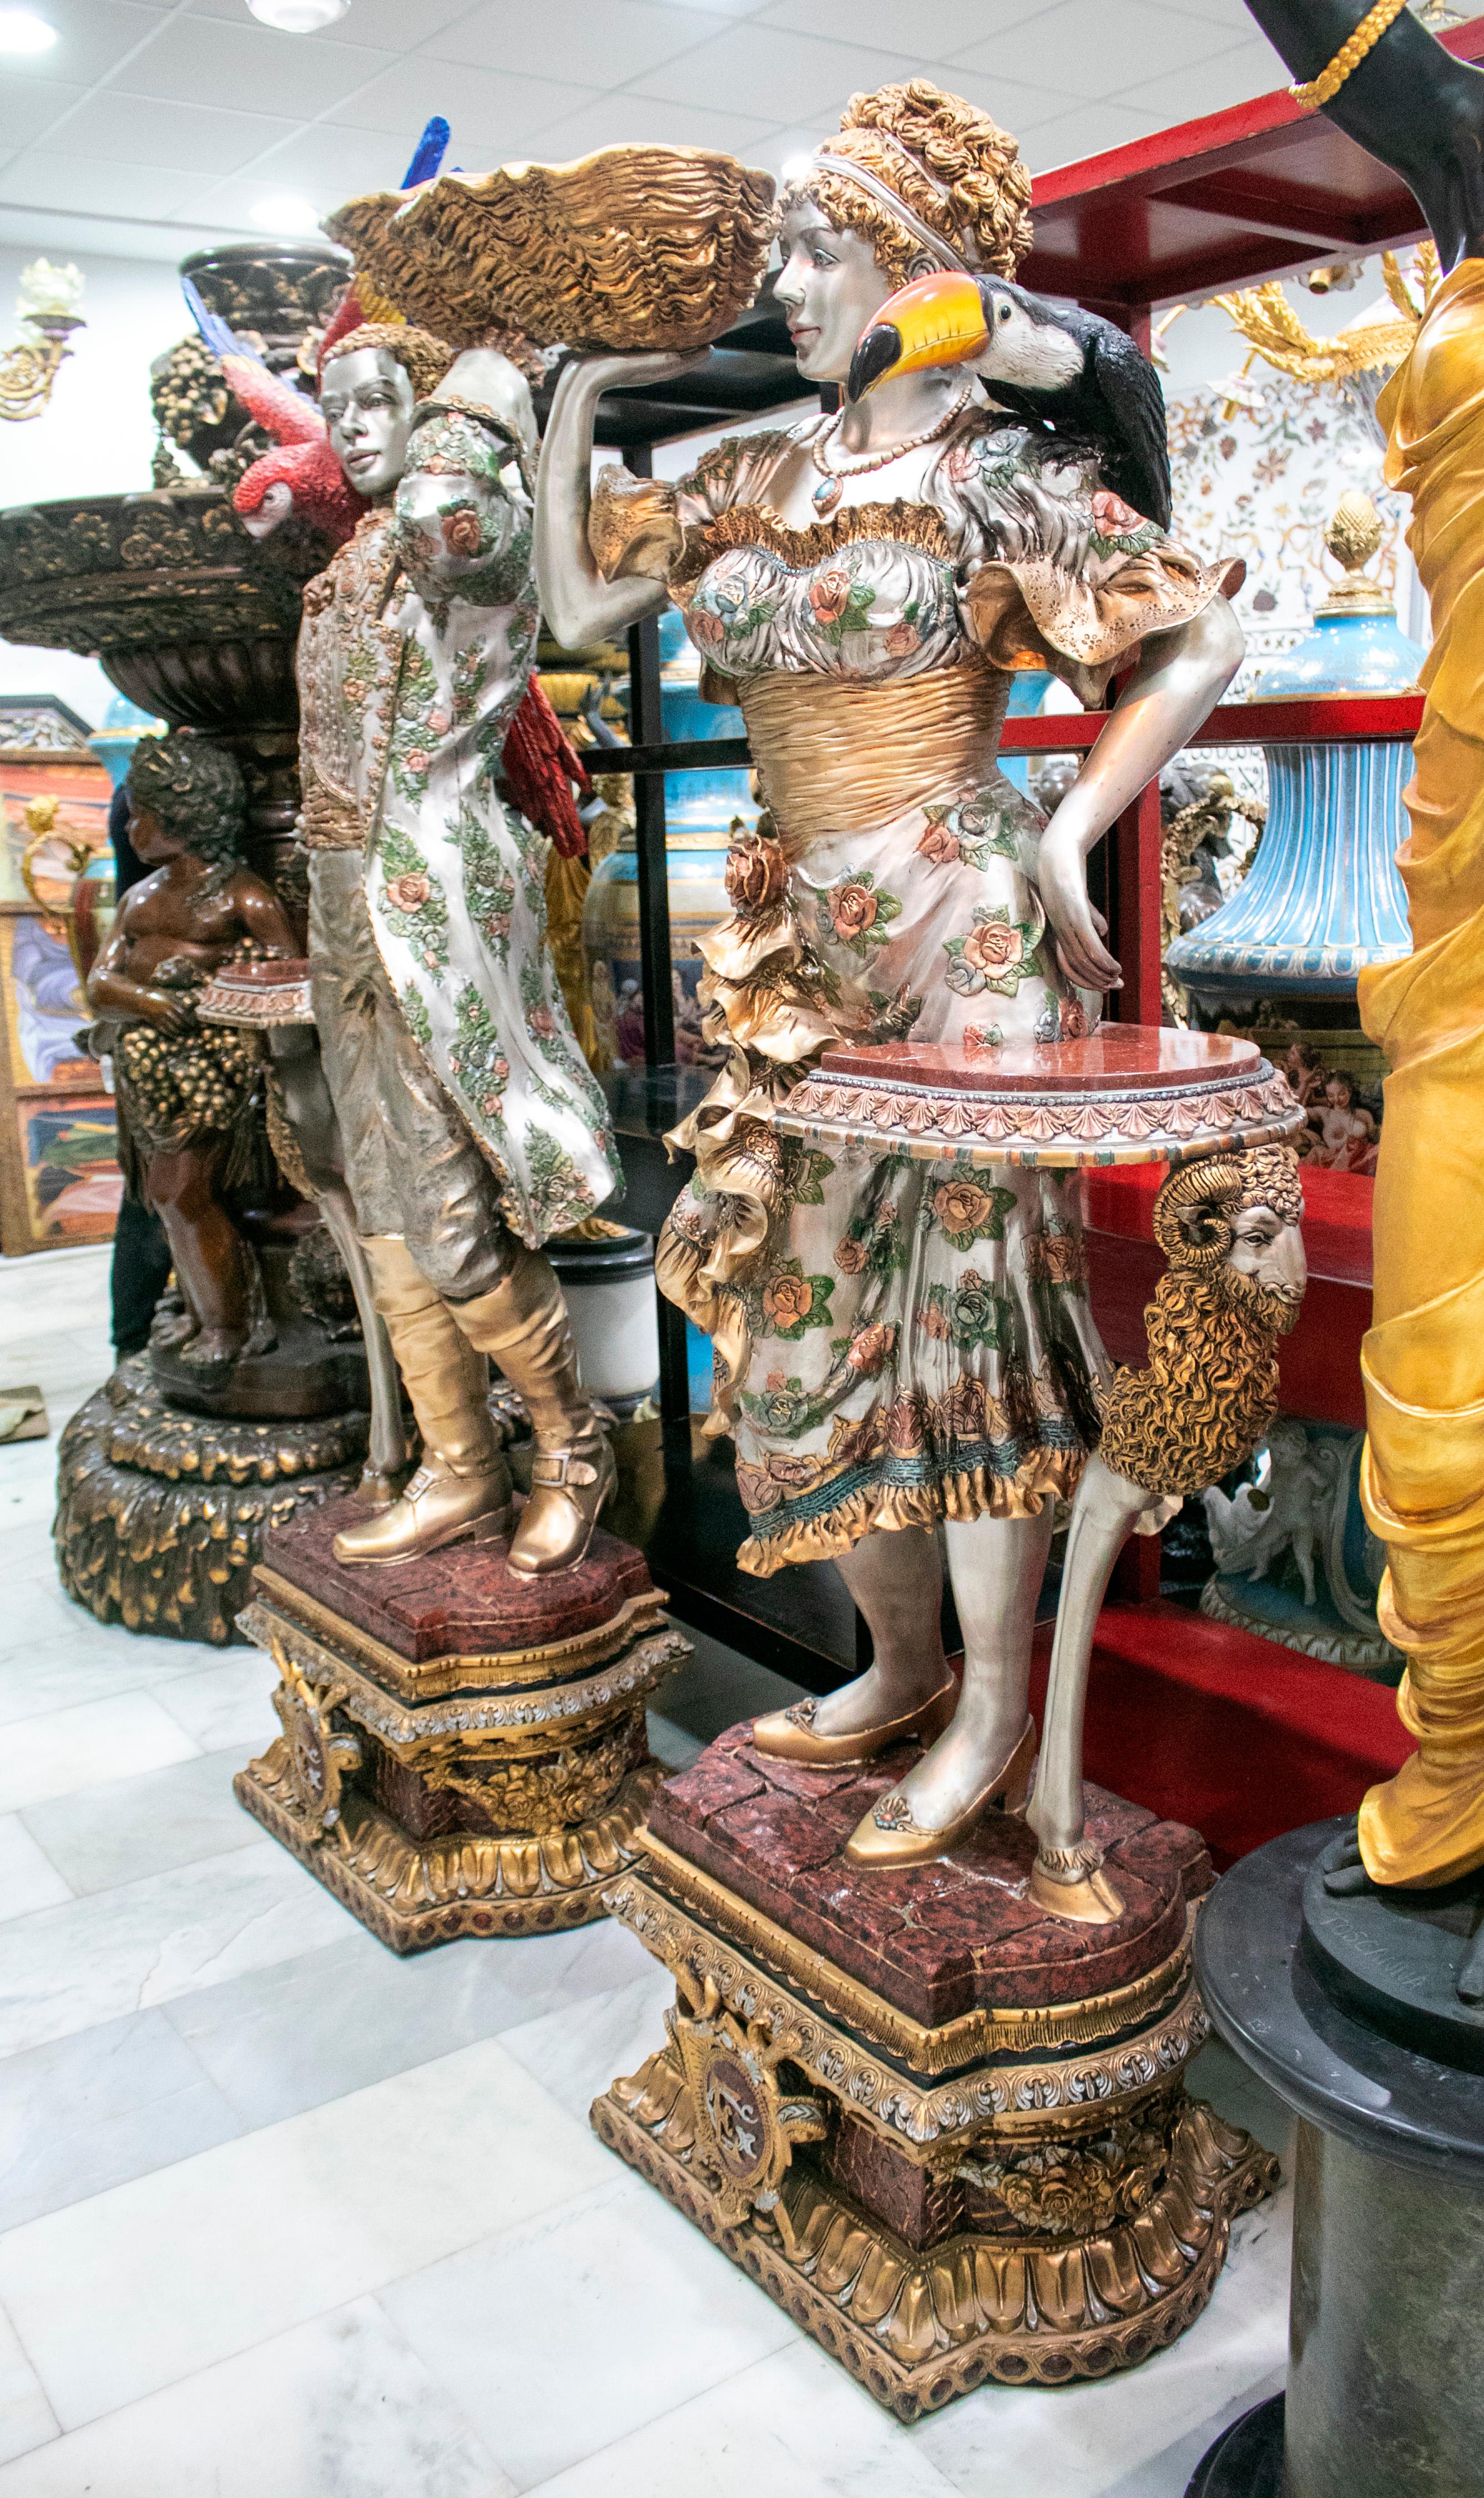 Pair of tall bronze life-size painted Venetian sculptures with birds and conchs, standing on pedestals.